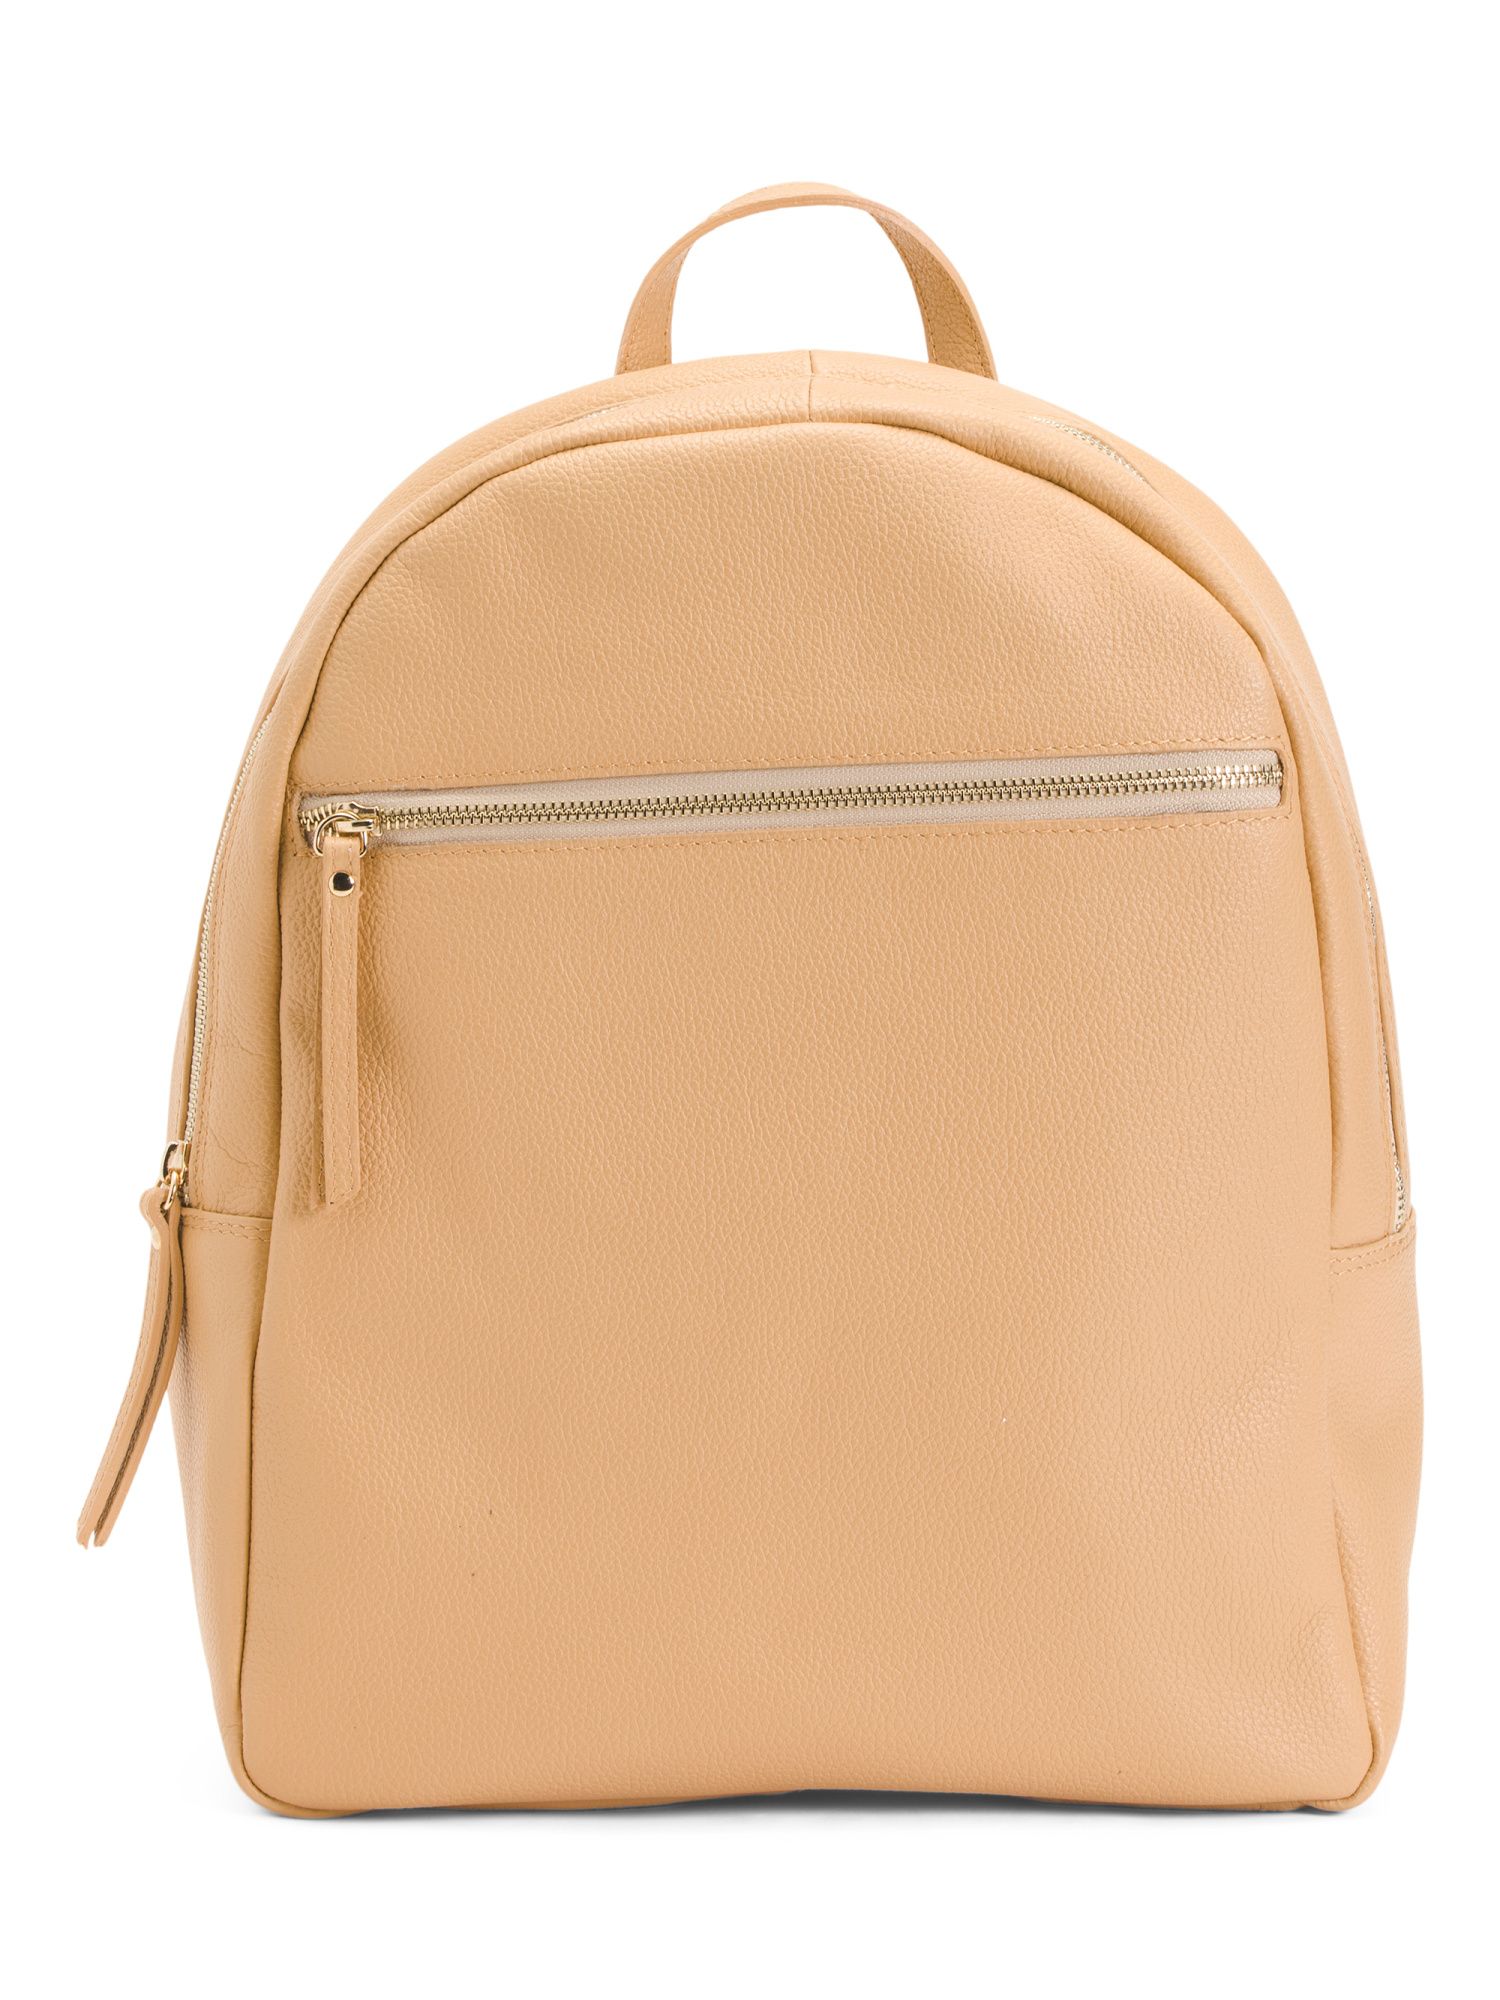 Made In Italy Leather Backpack | TJ Maxx